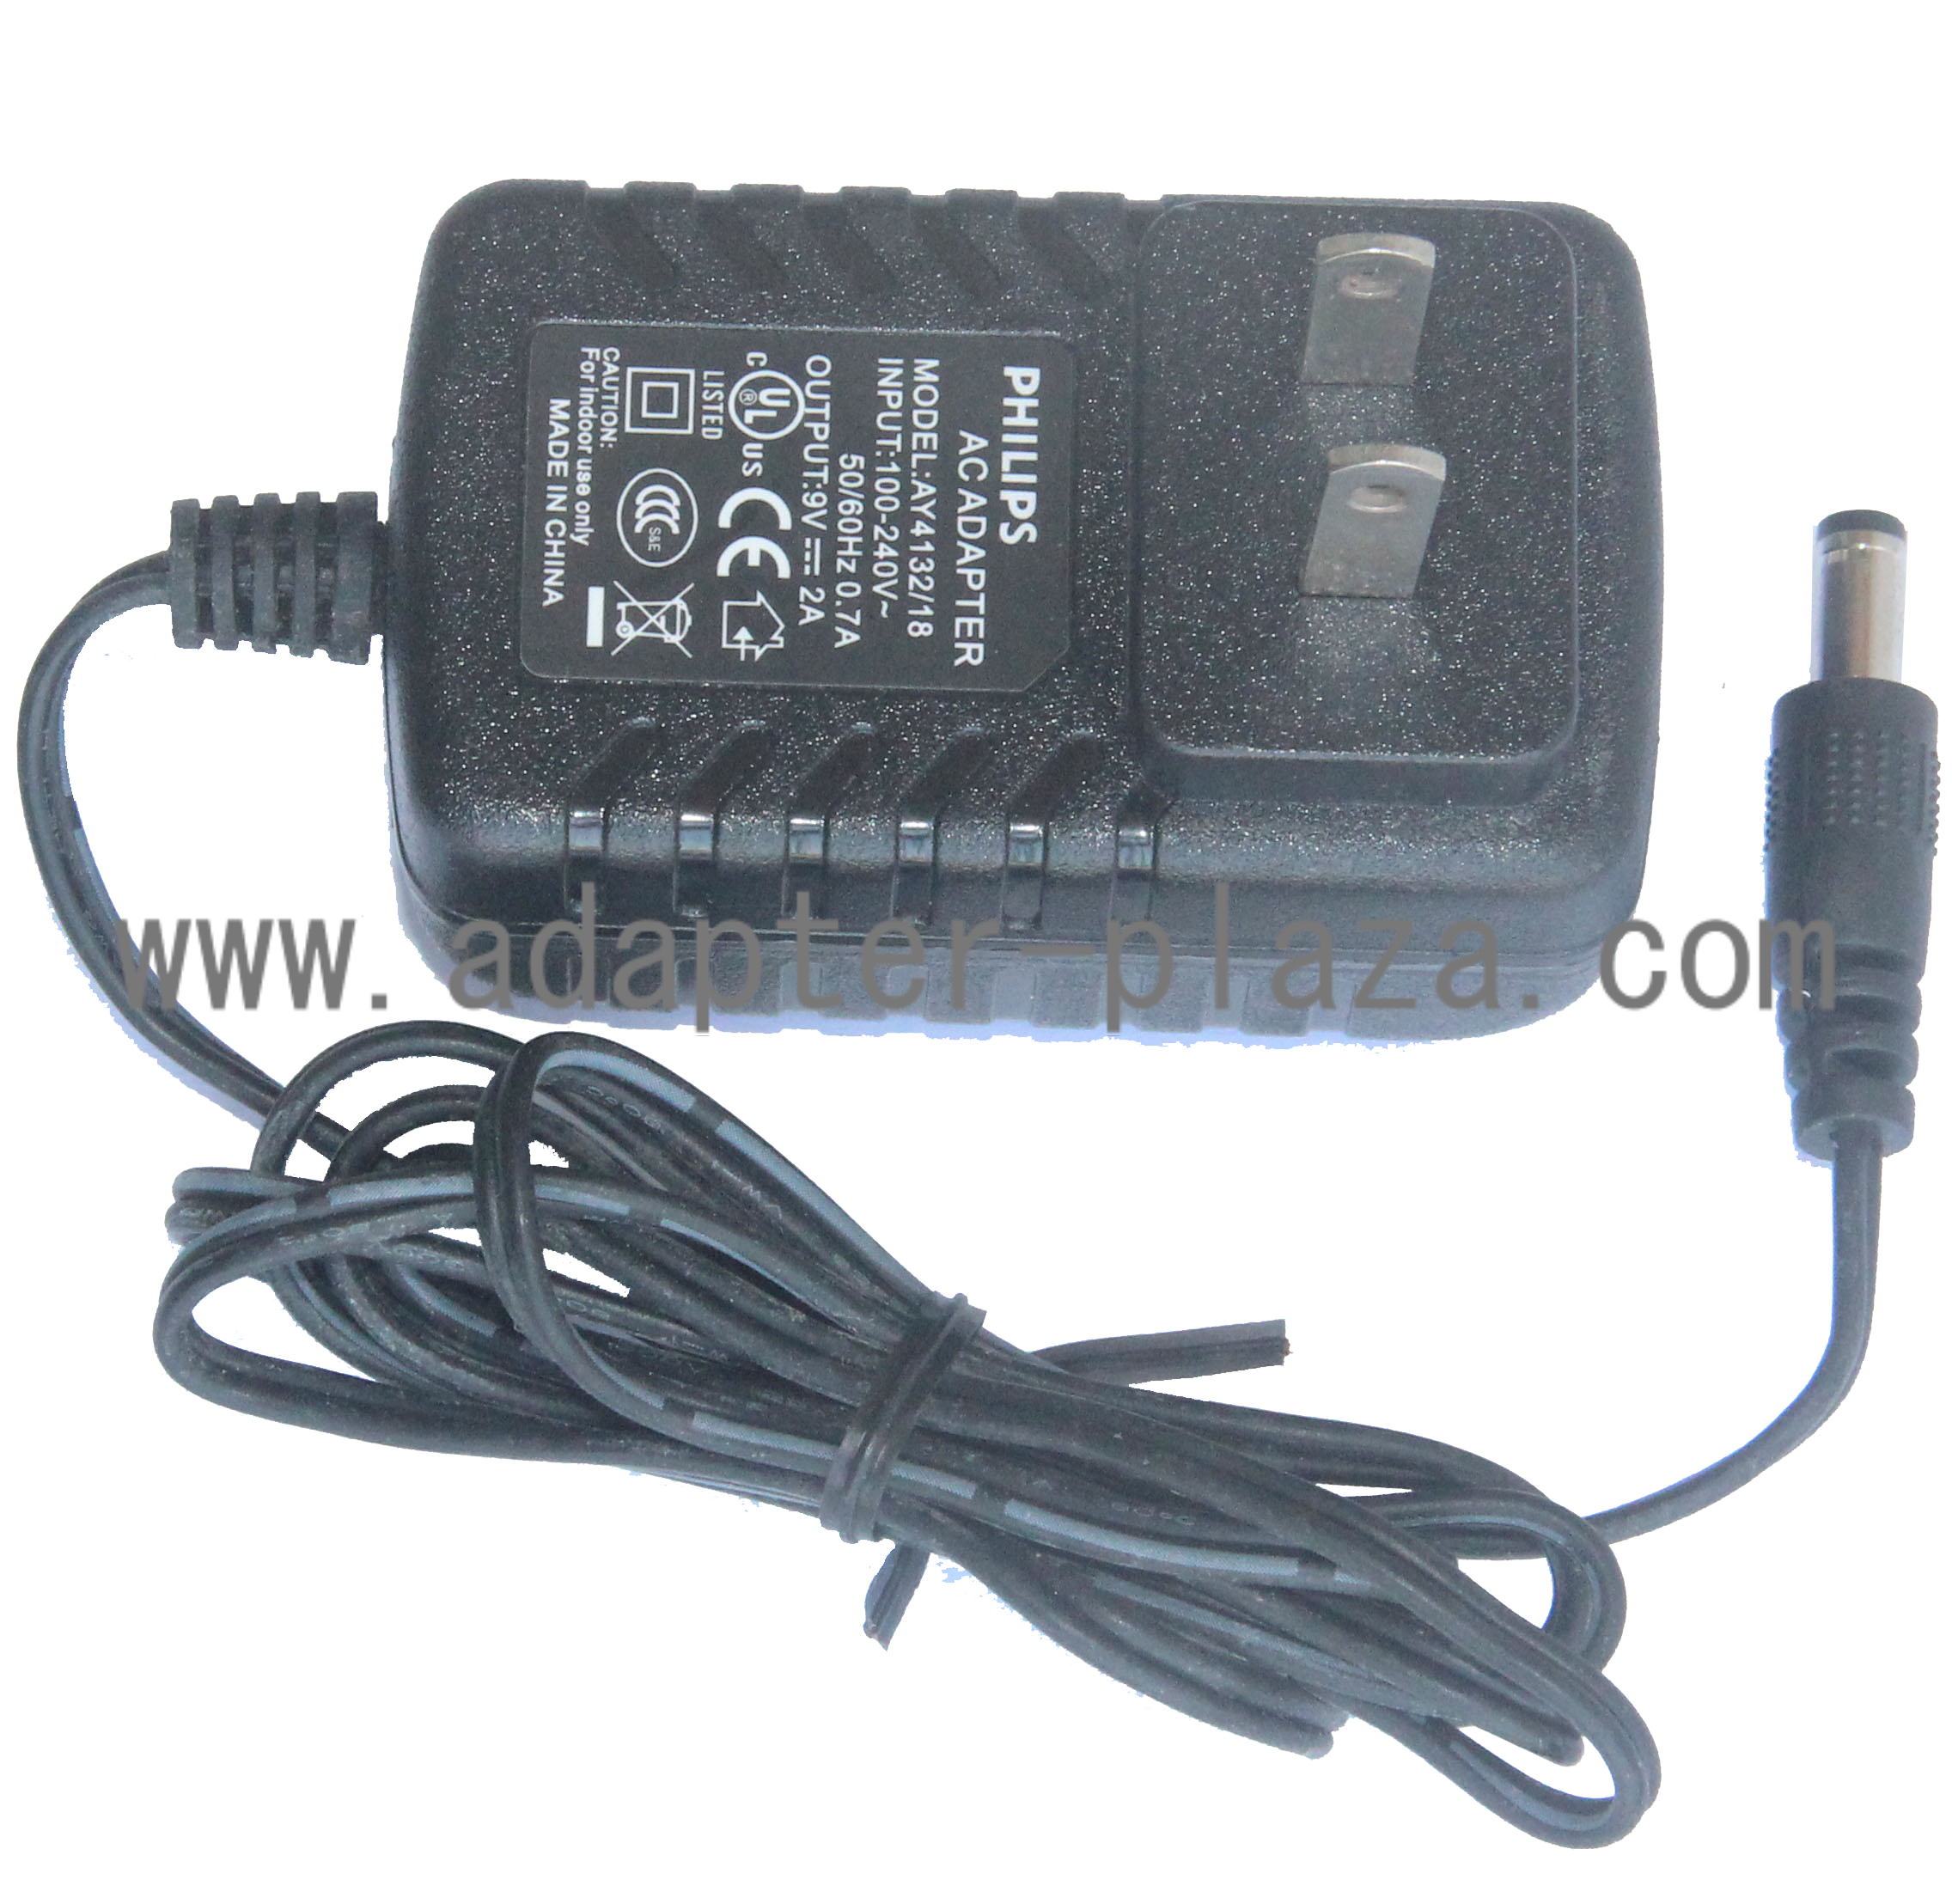 *Brand NEW* DC9V 2A (18W) AC DC Adapter POWER SUPPLY PHILIPS AY4132/18